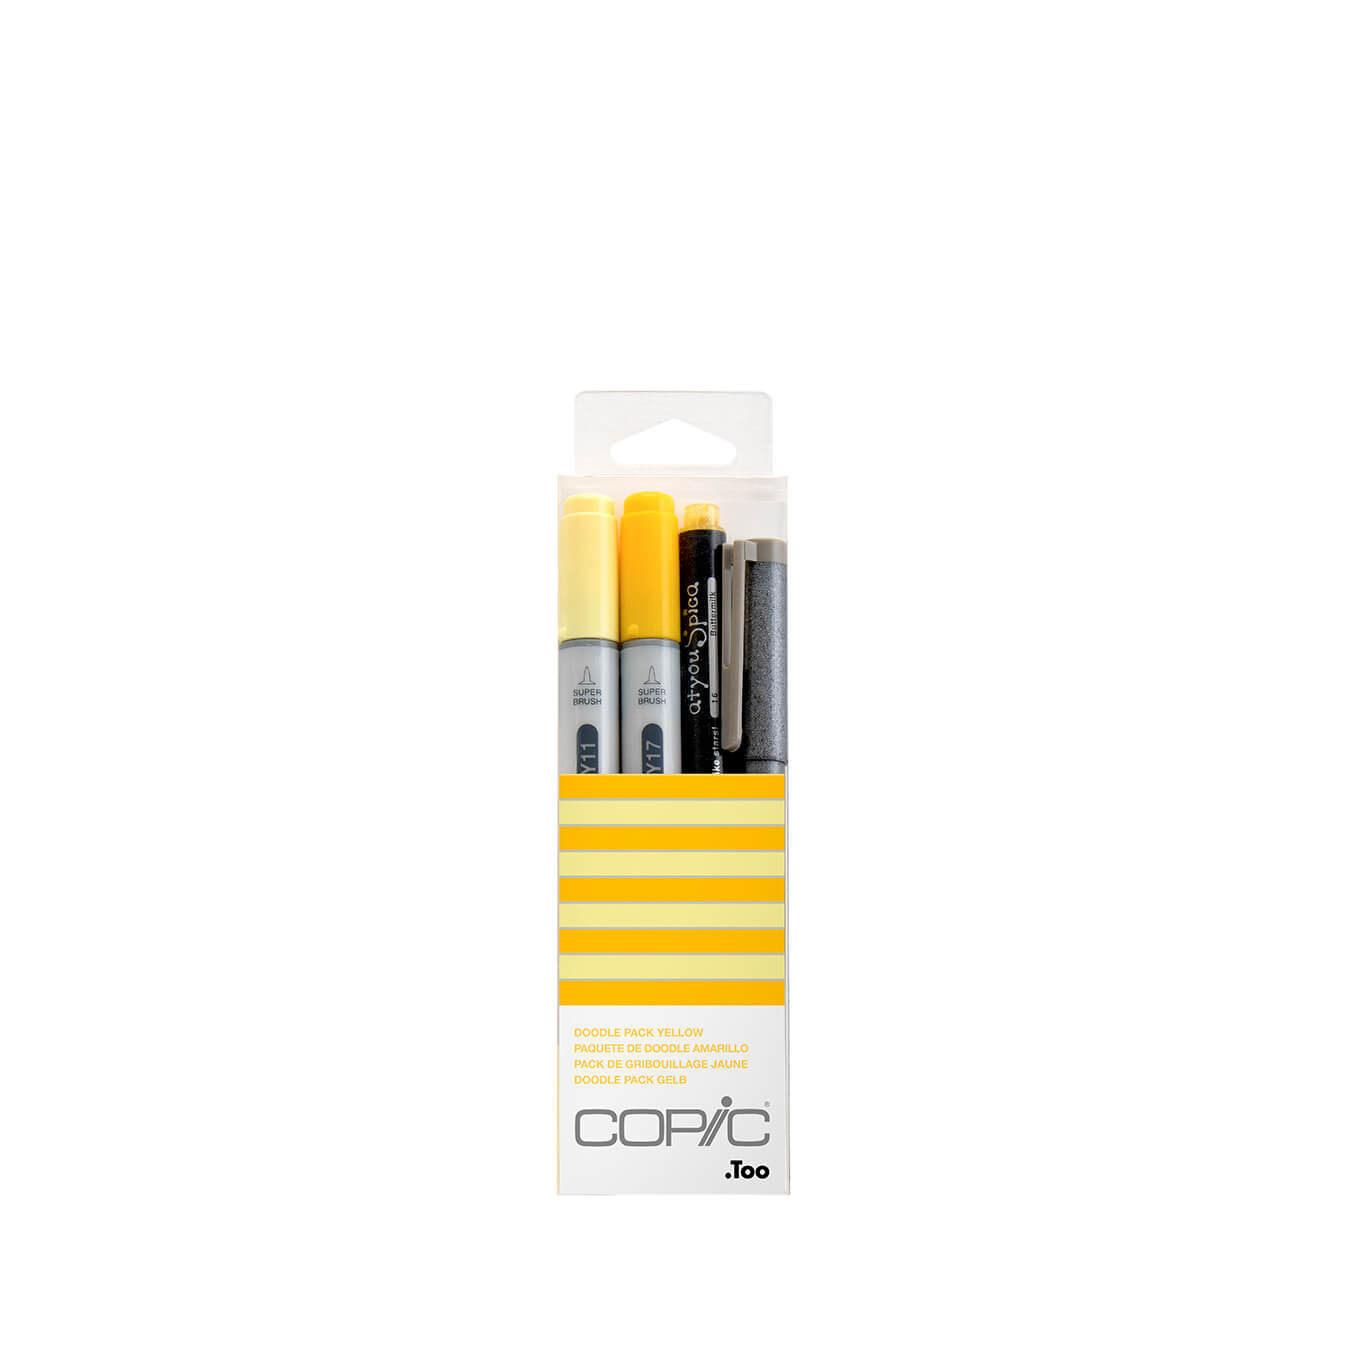 Copic Ciao Doodle pack Yellow